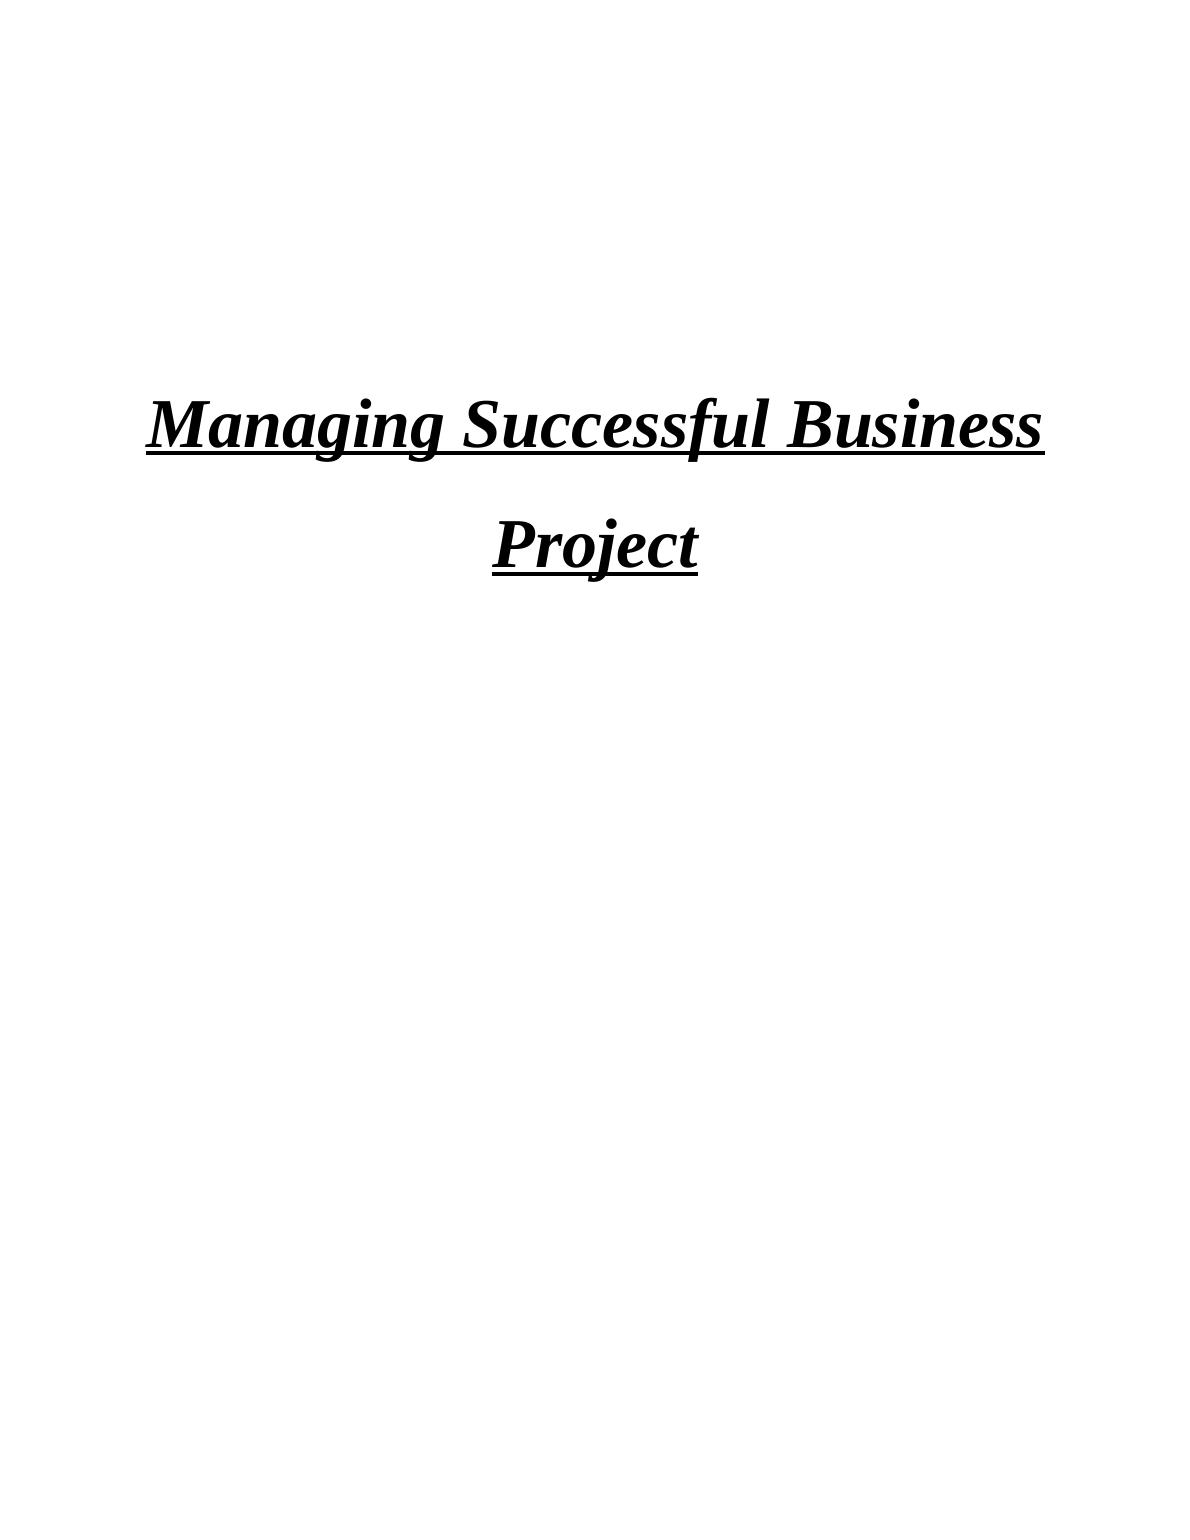 Managing Successful Business Project - TESCO_1